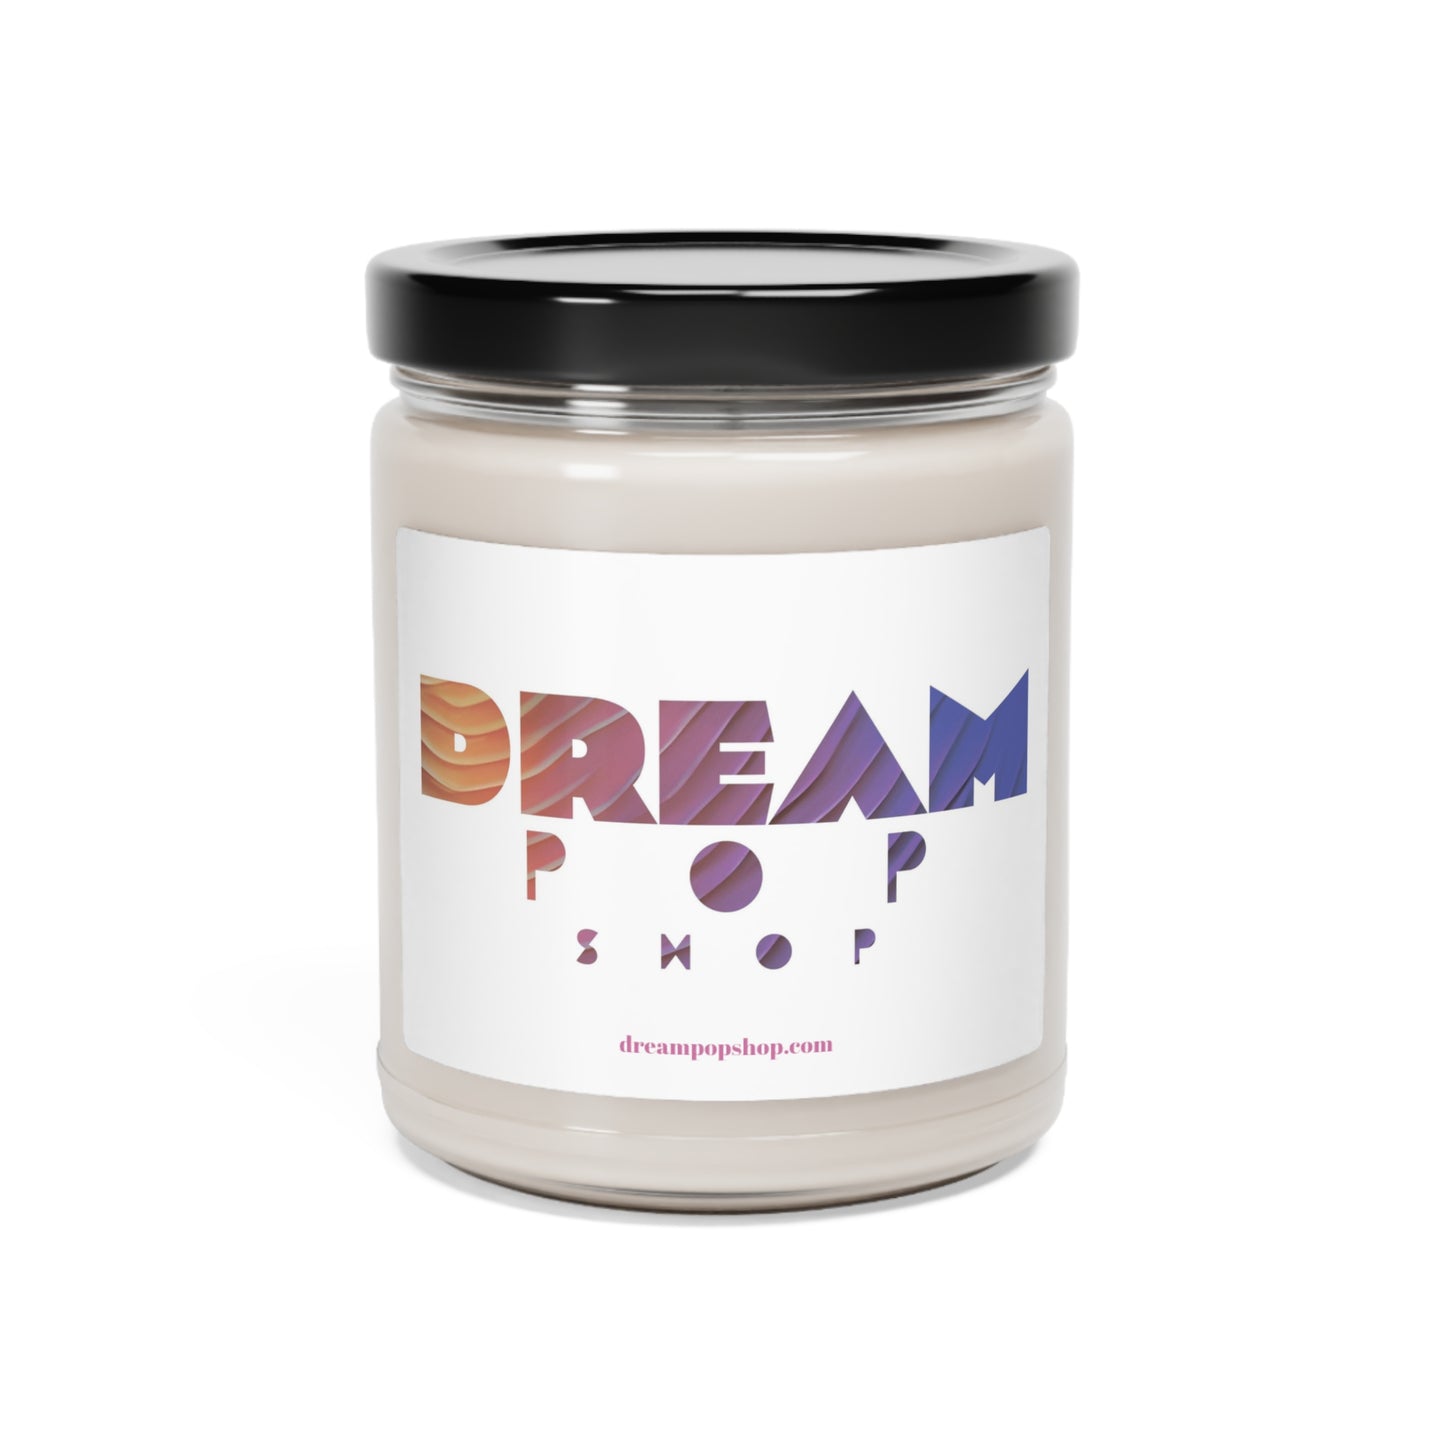 Dream Pop Shop Scented Soy Candle, 9oz